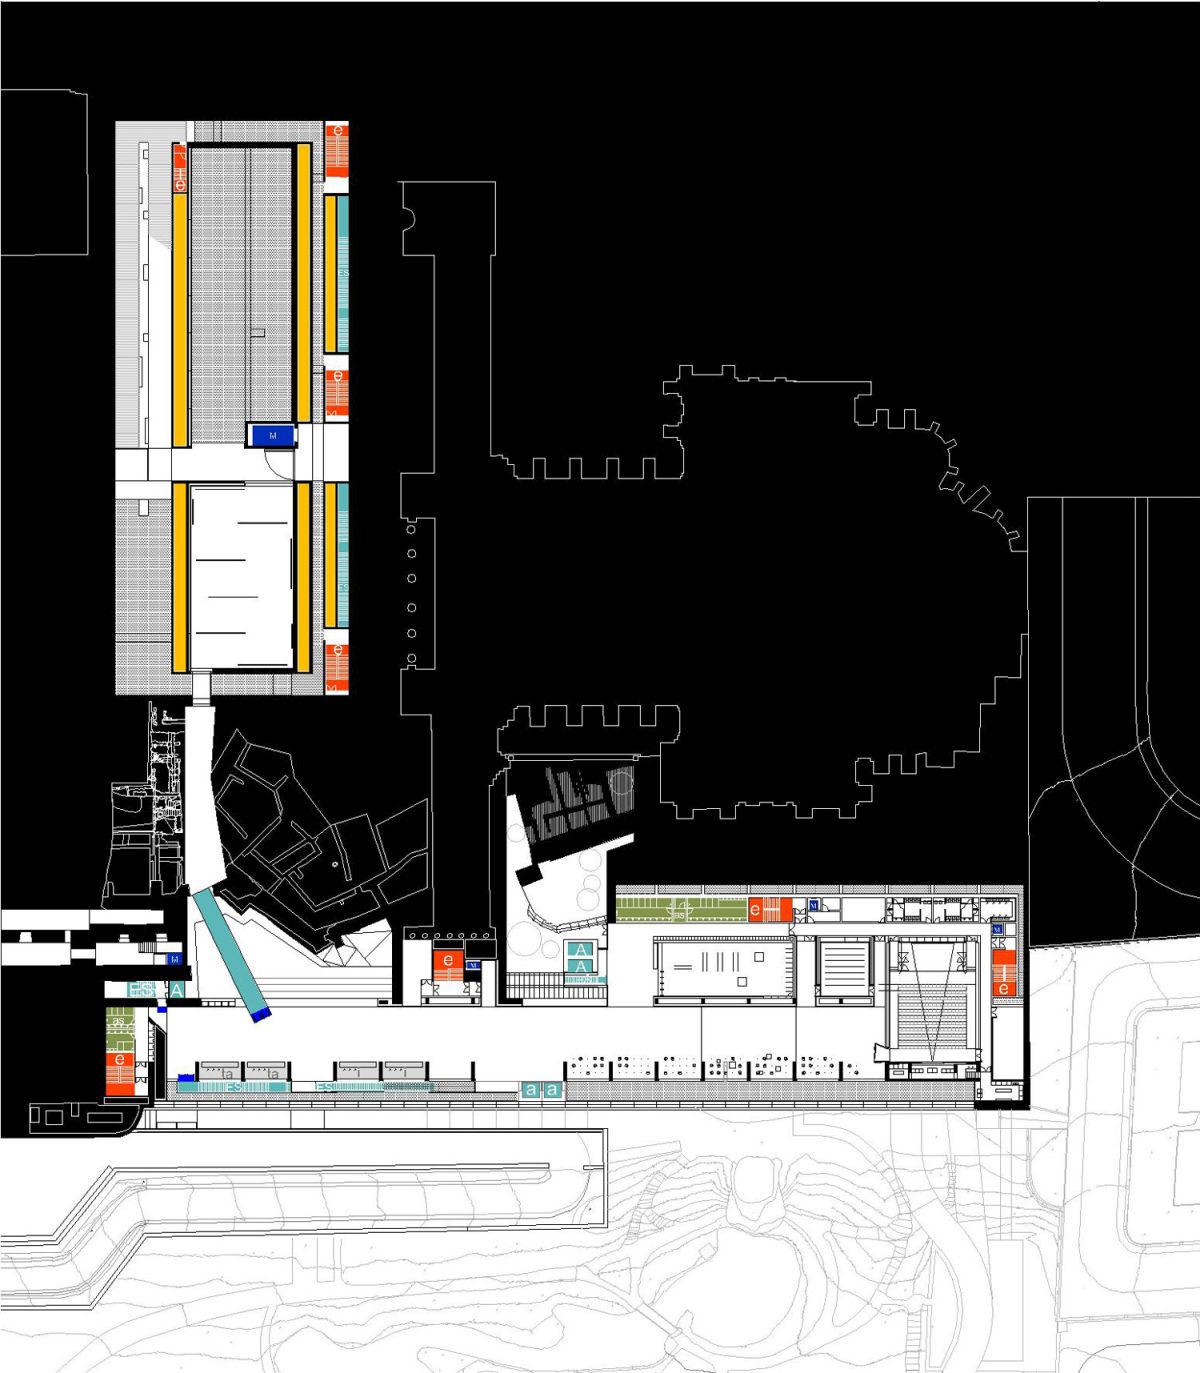 Floor Plan of the Royal Collections Museum in Madrid by Luis Moreno Mansilla and Emilio Tuñón